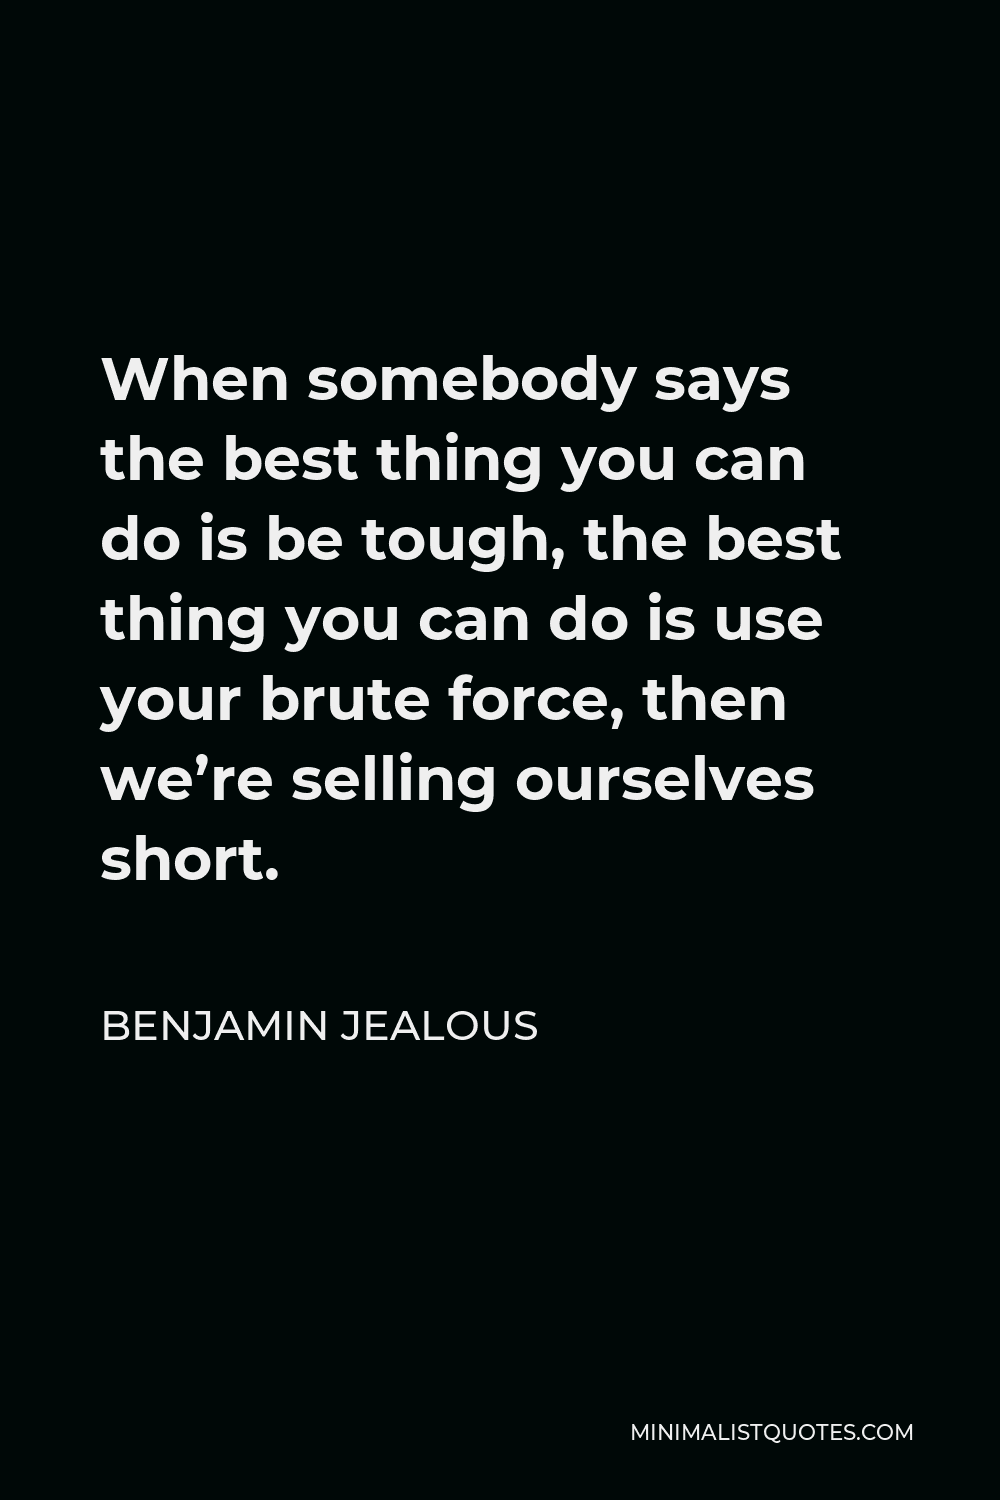 Benjamin Jealous Quote - When somebody says the best thing you can do is be tough, the best thing you can do is use your brute force, then we’re selling ourselves short.